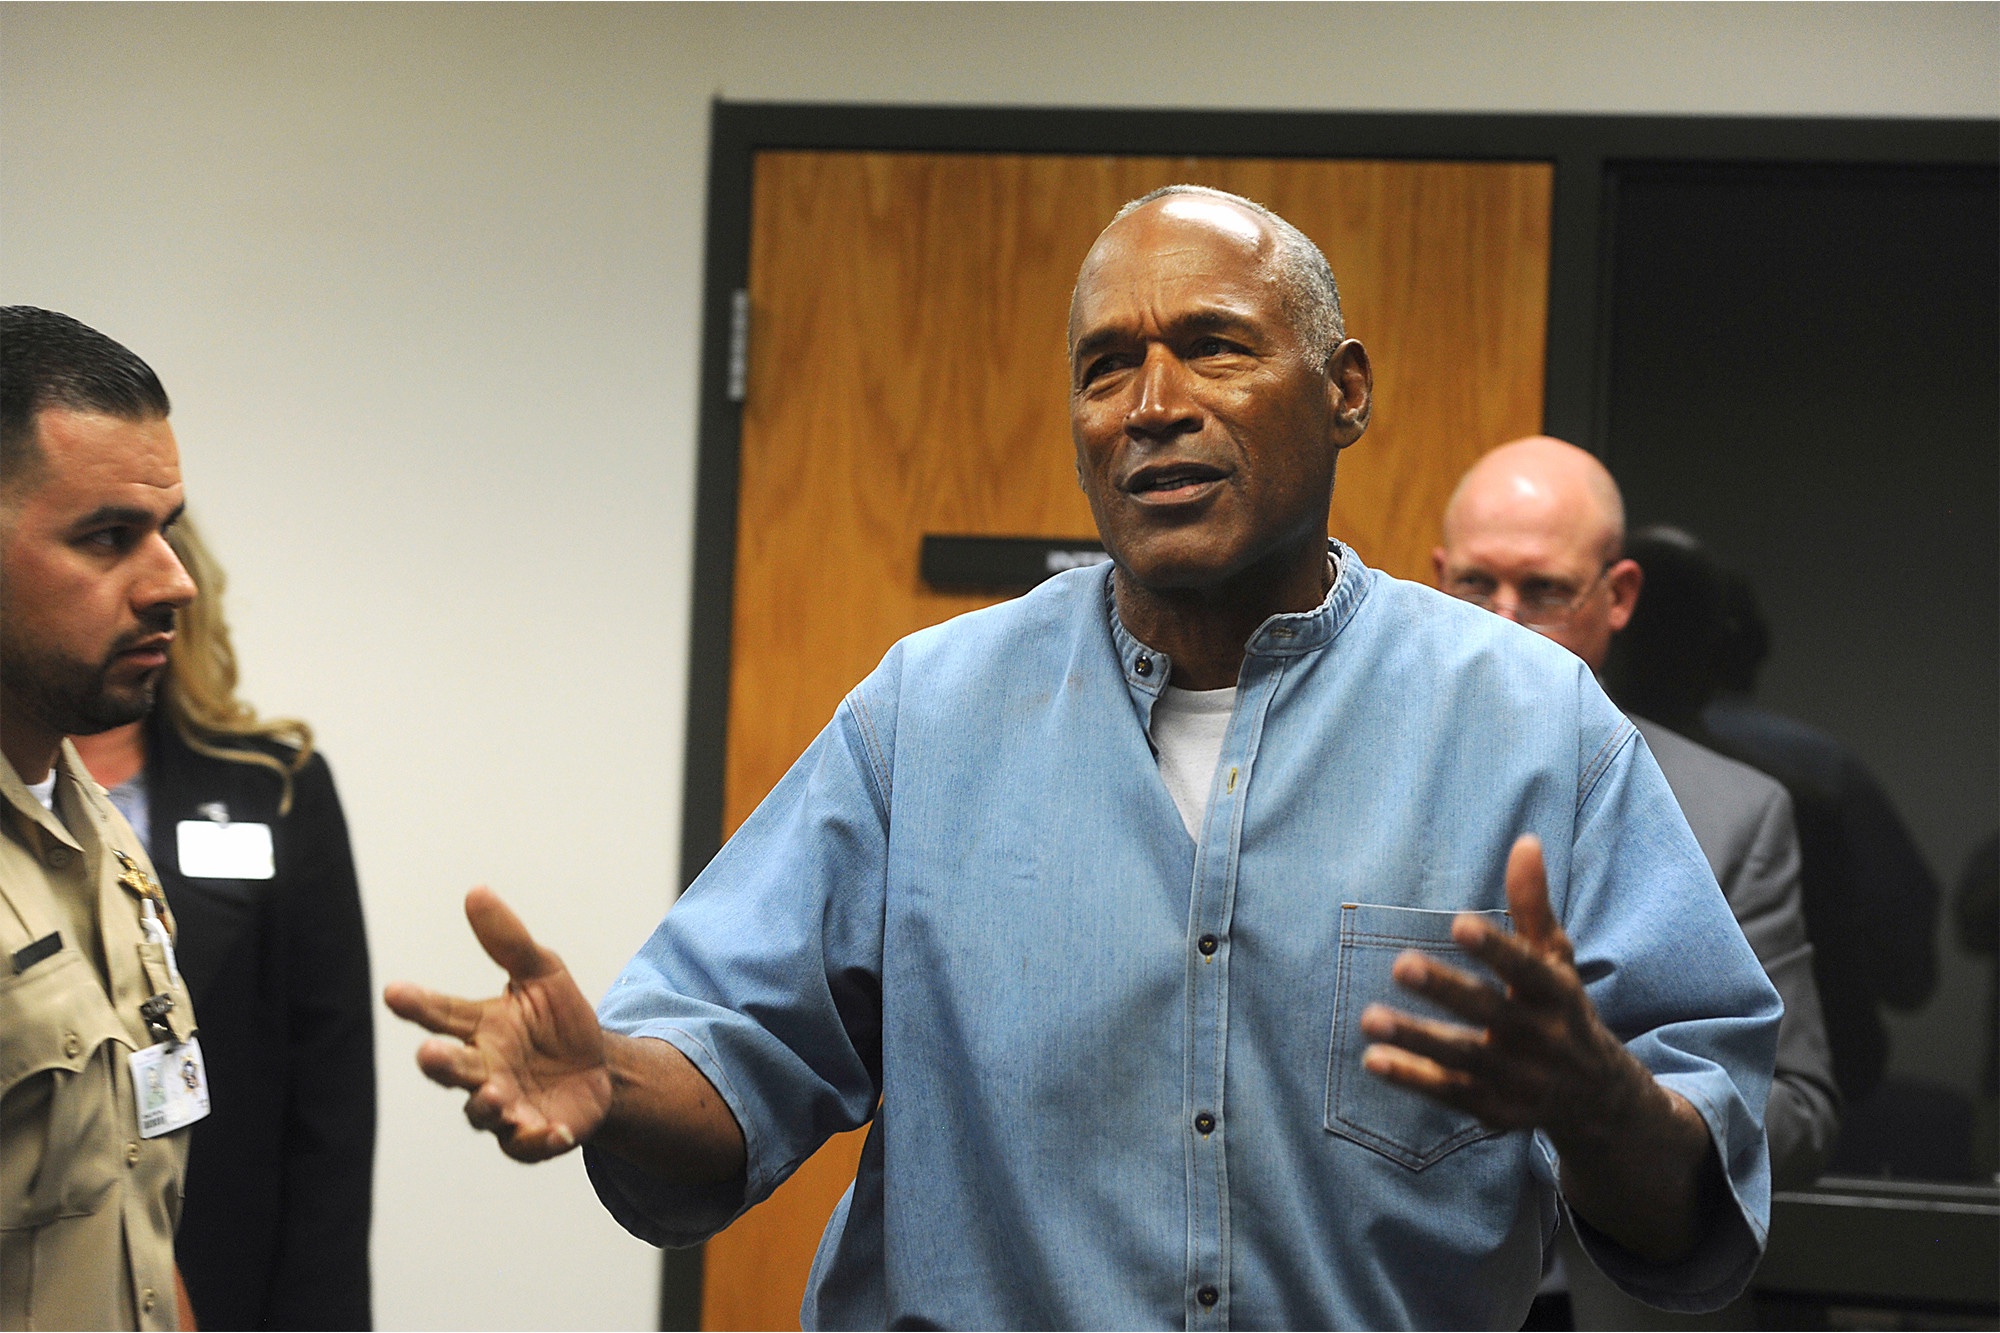 O.J. Simpson now ‘a completely free man’ after being discharged from parole